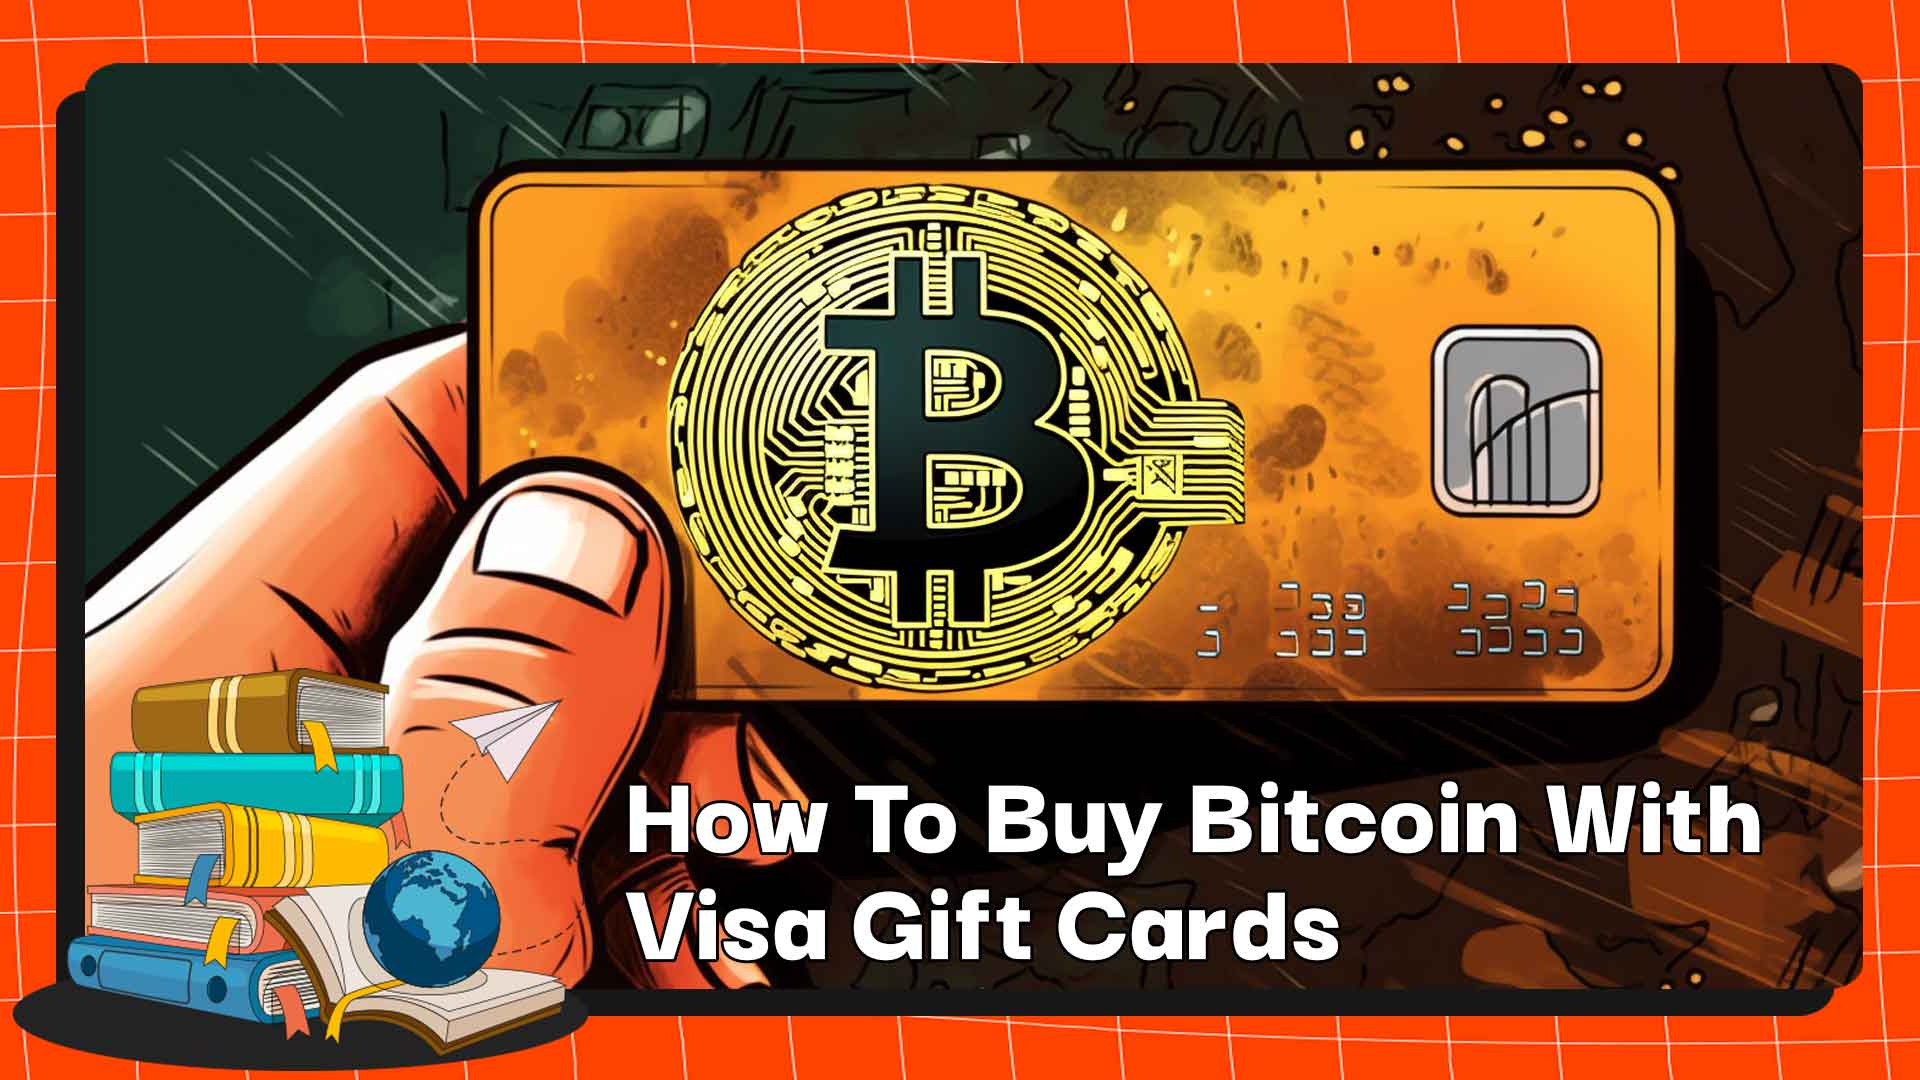 Buying Bitcoin With Prepaid Card : Here Is How In 